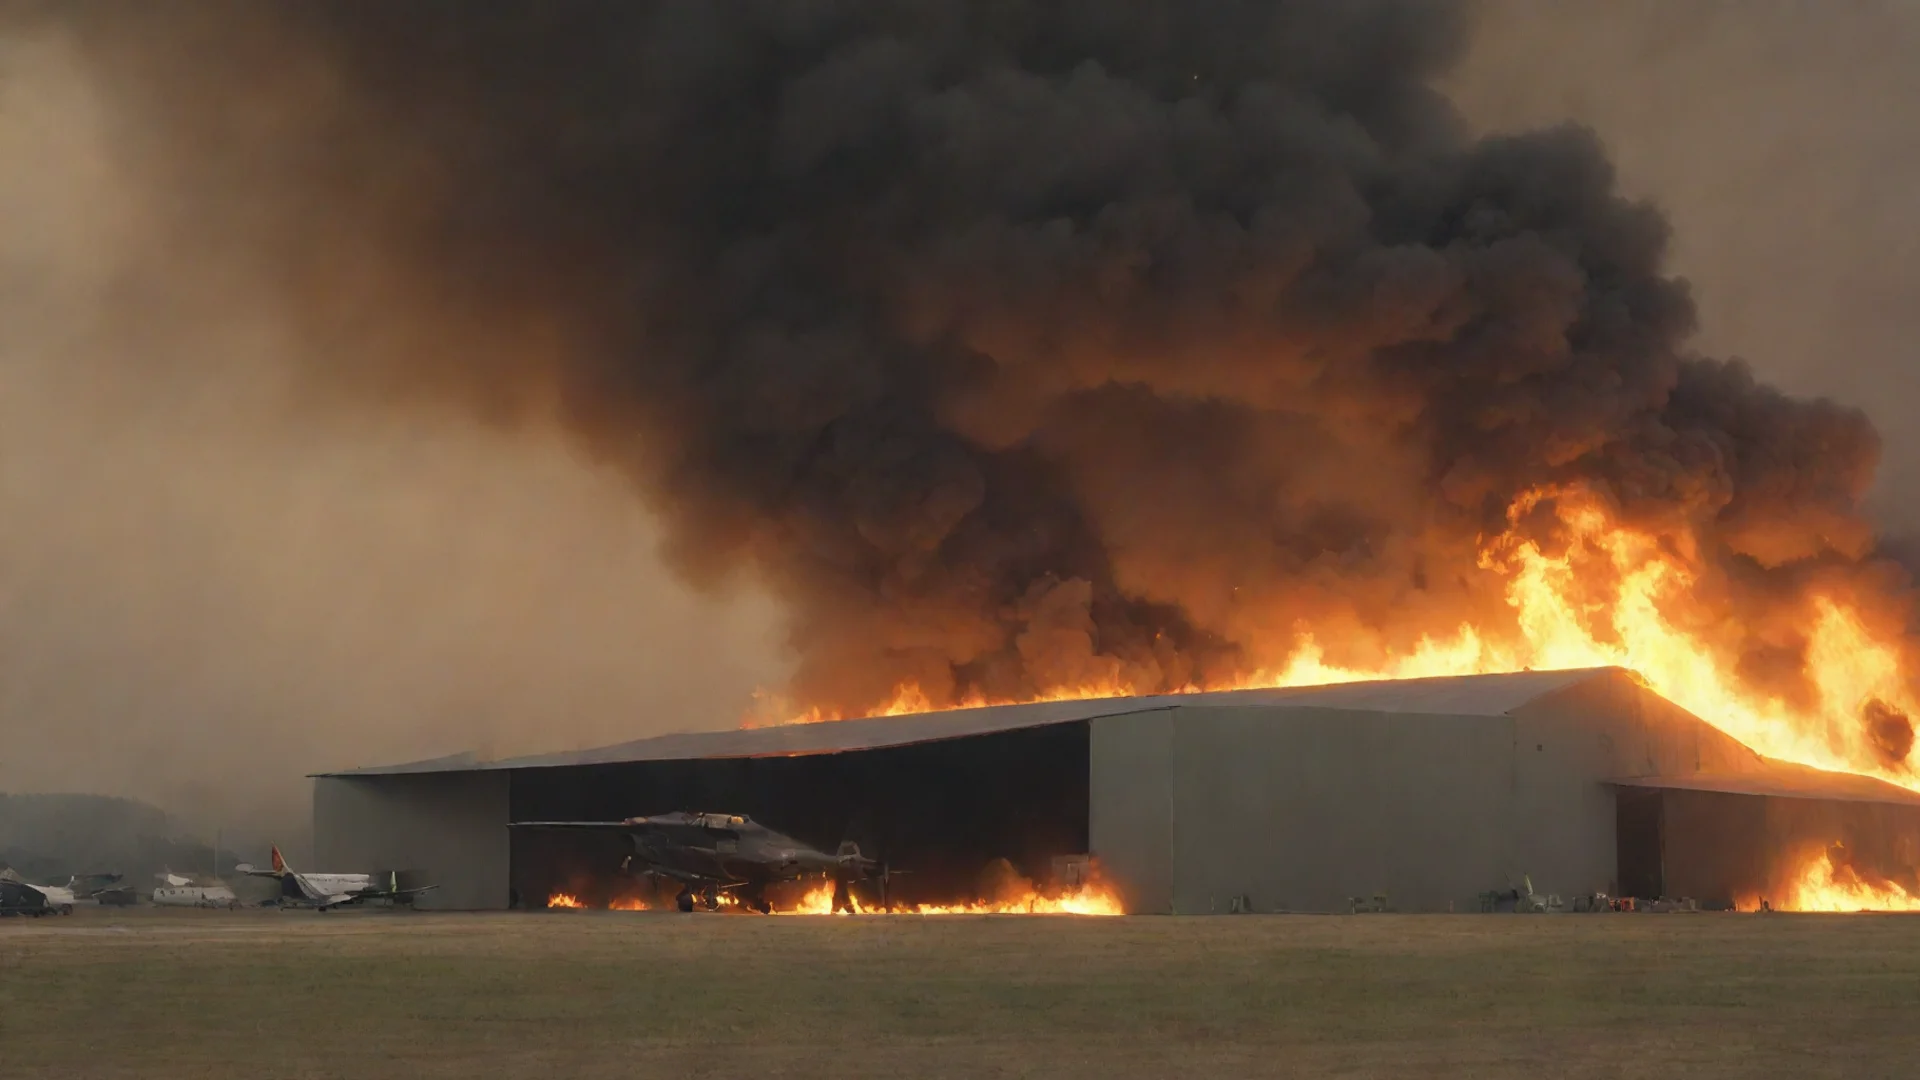 amazing burning hangar with huge new aurplane in front awesome portrait 2 wide